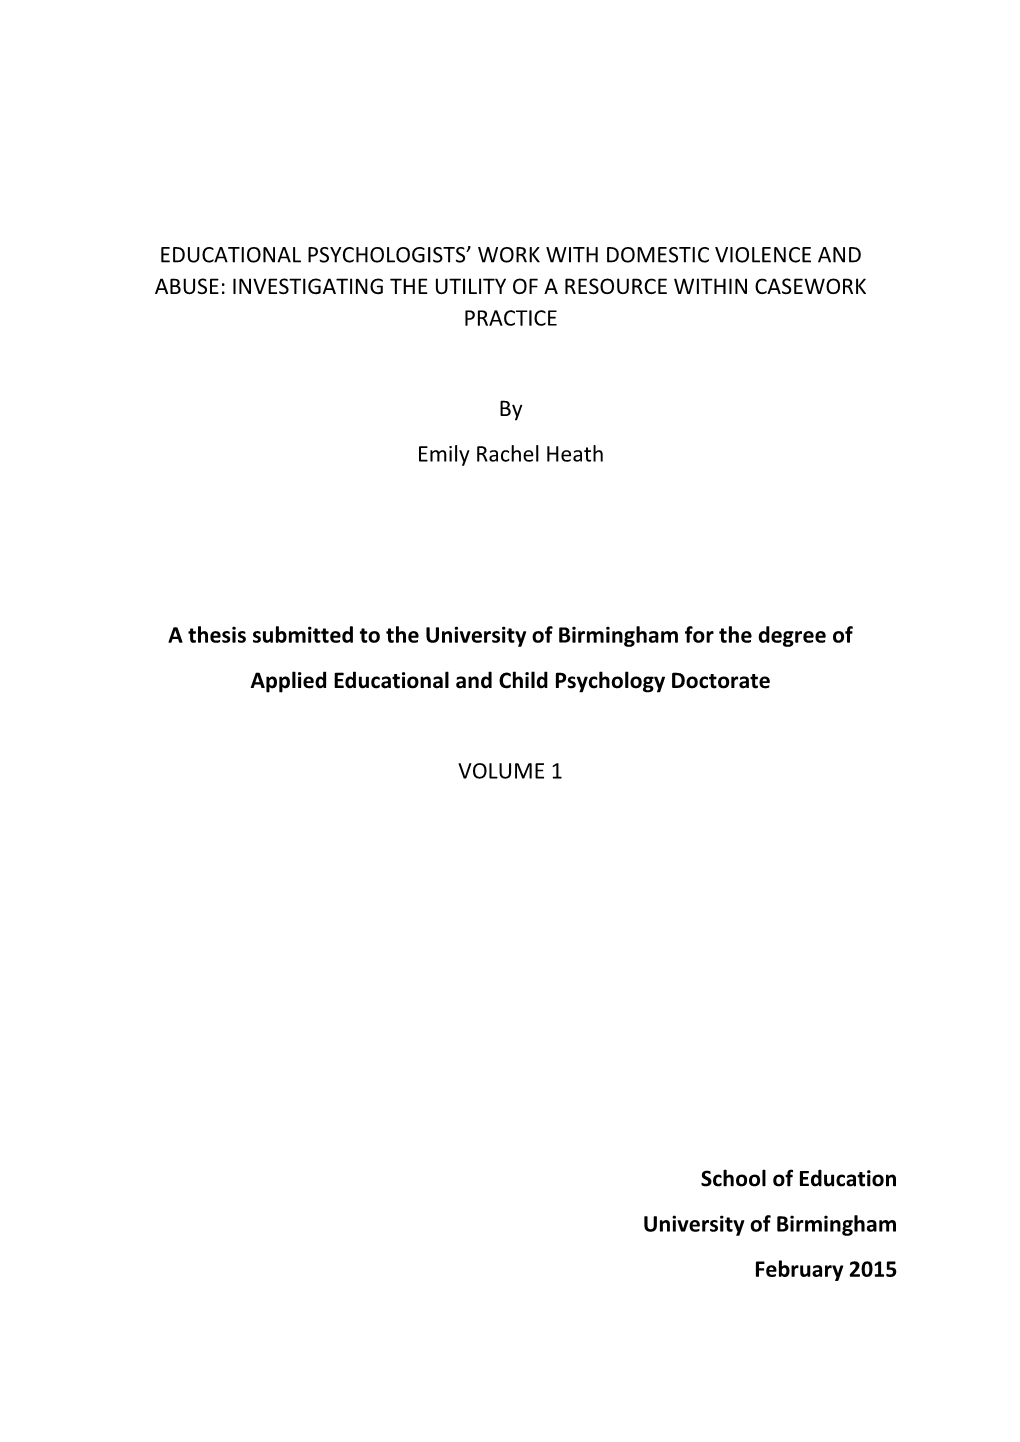 Educational Psychologists' Work with Domestic Violence and Abuse